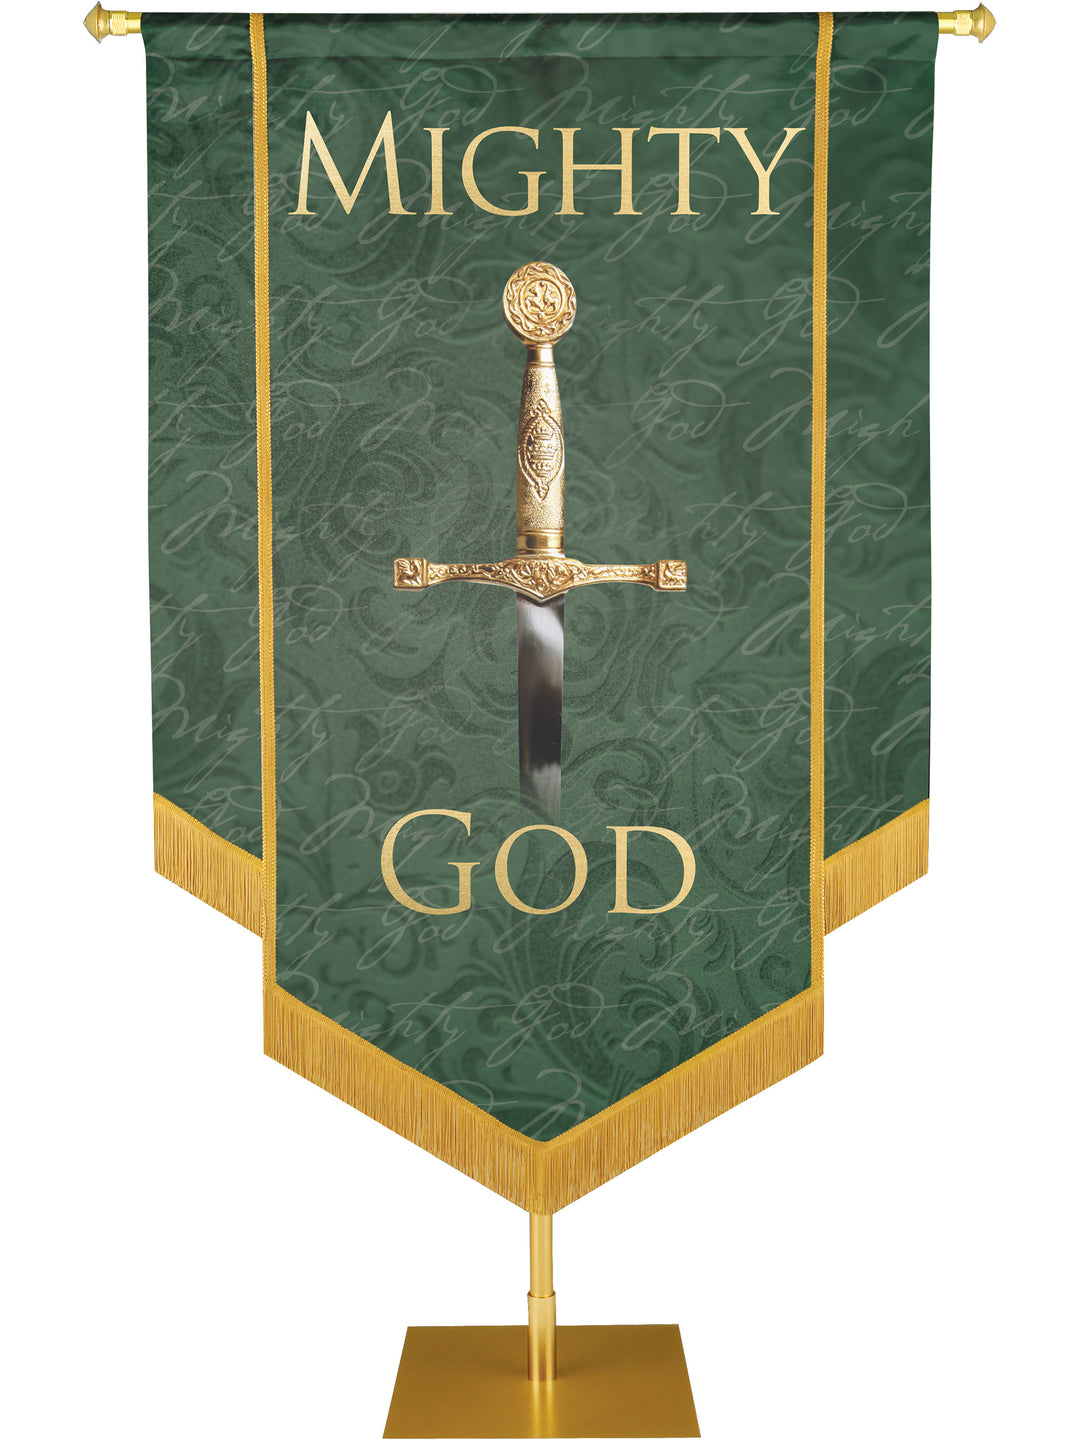 Names of Christ Mighty God Embellished Banner - Handcrafted Banners - PraiseBanners